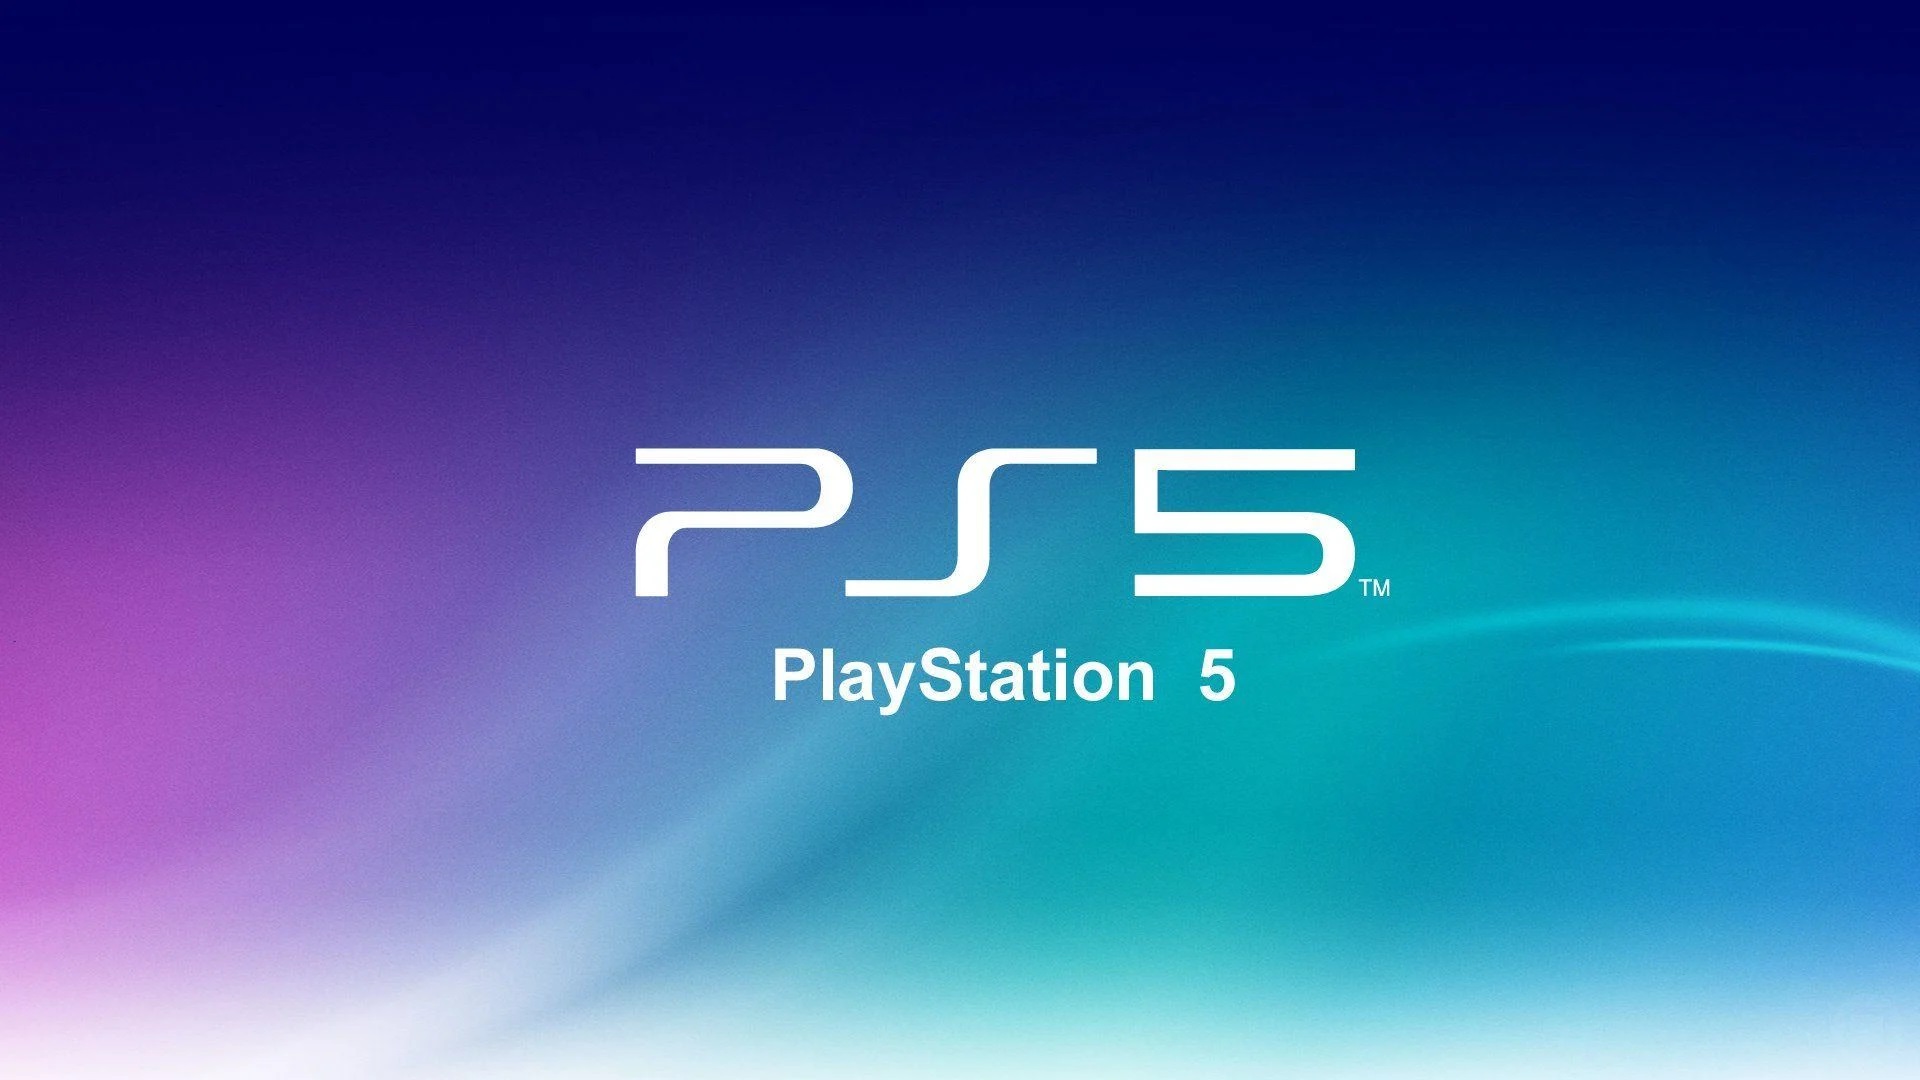 Leaked Microsoft document claims PS5 Slim is coming this year for